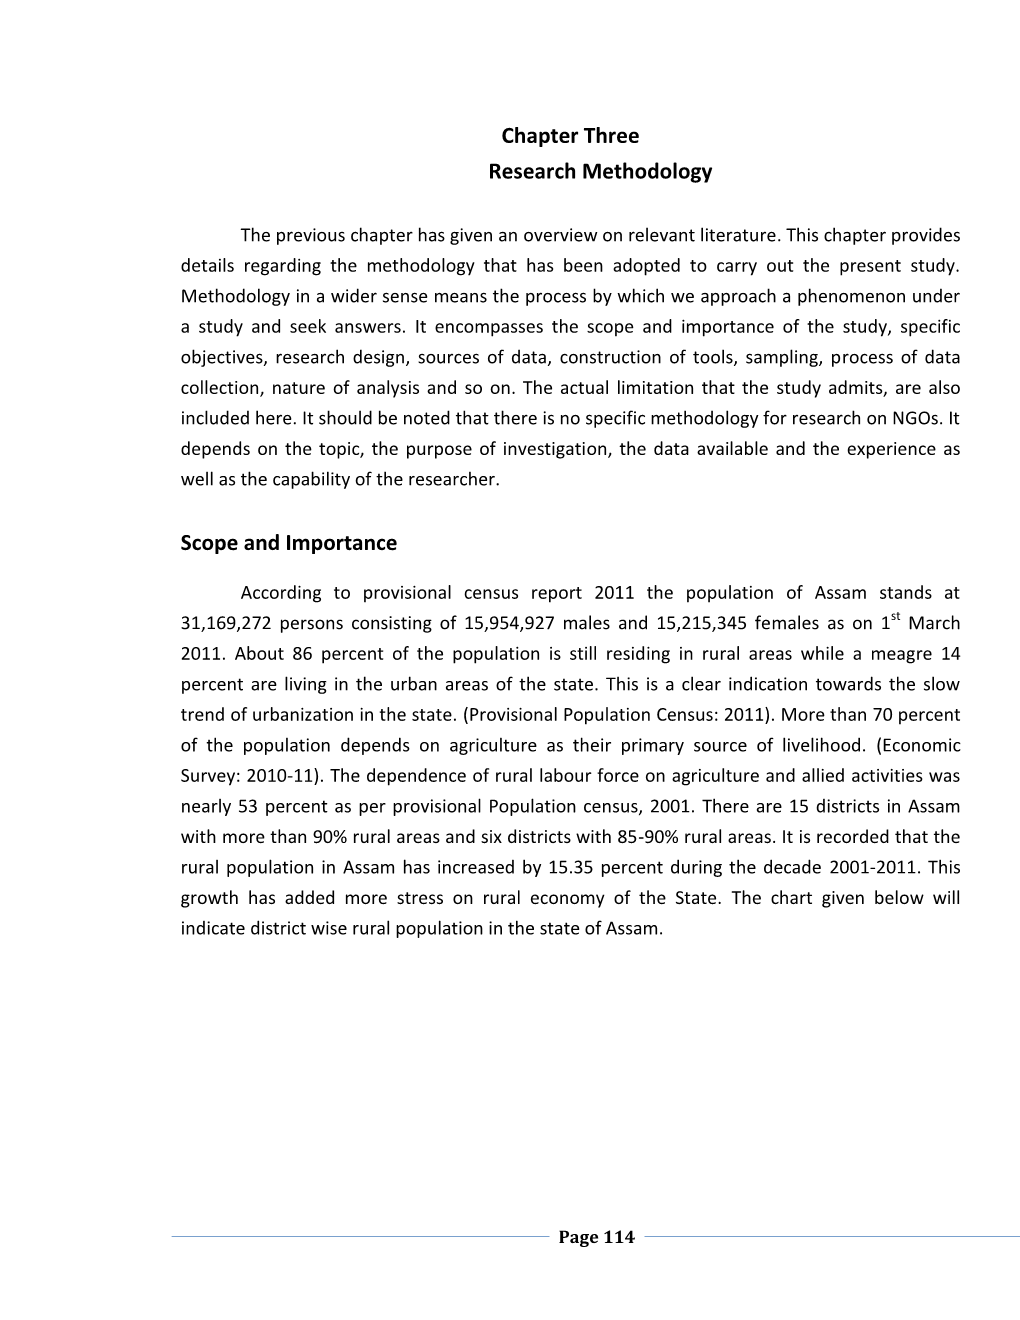 Chapter Three Research Methodology Scope and Importance